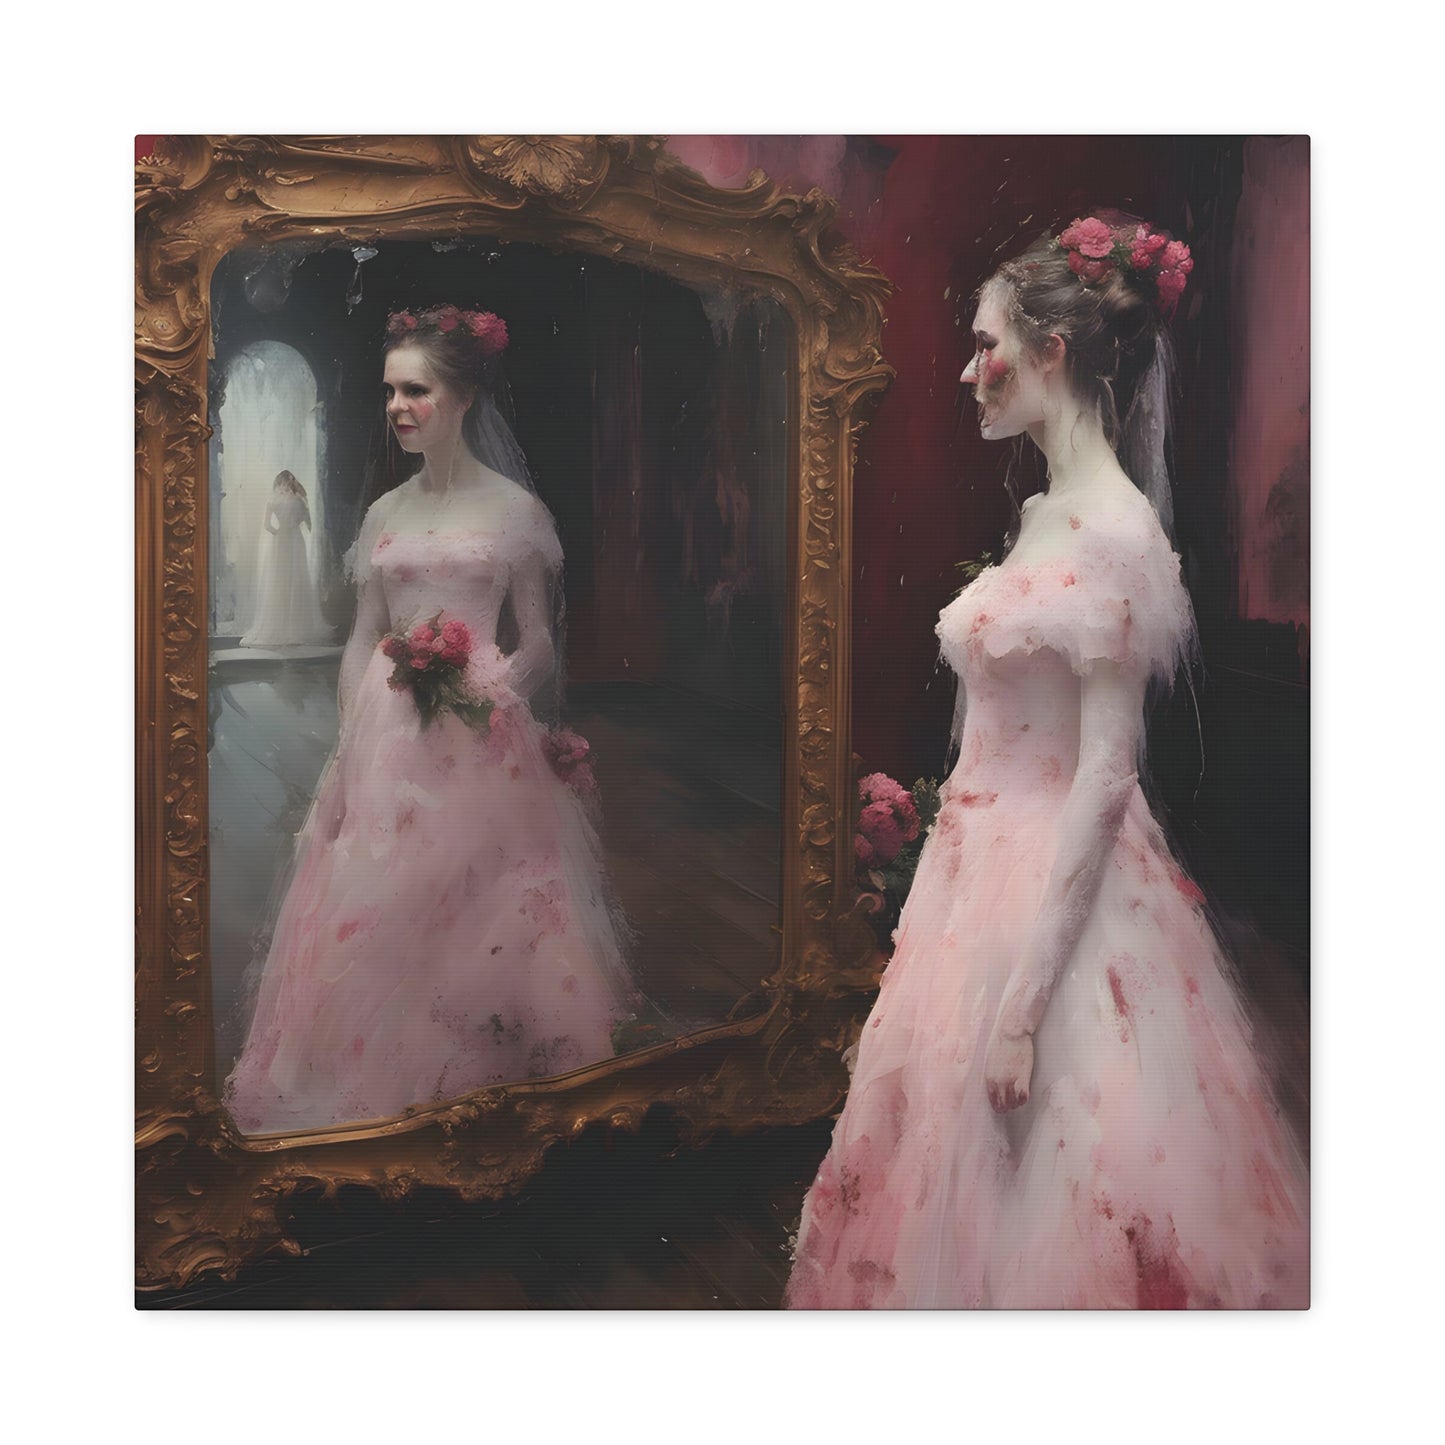 Clara Belle Fontaine.Reflections of a Timeless Moment. Exclusive Canvas Print